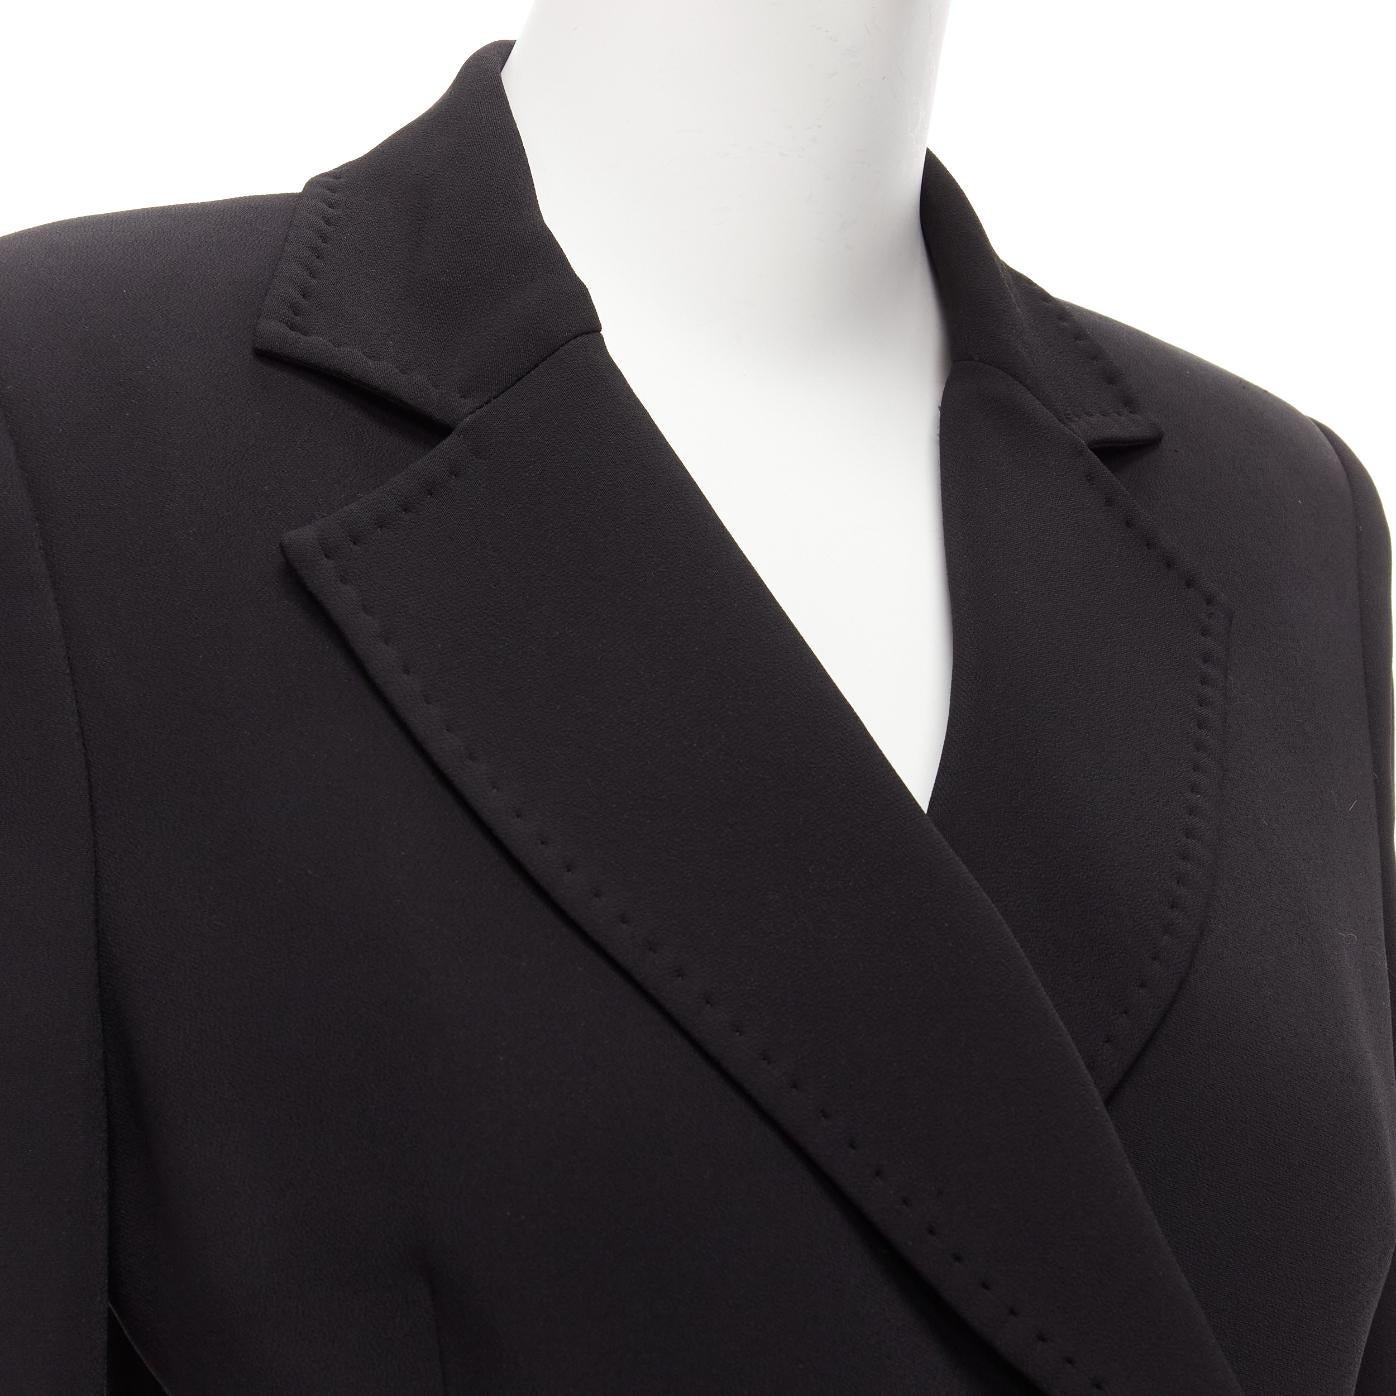 rare MOSCHINO Runway black gold crystal dollar sign button blazer jacket IT40 S For Sale 4